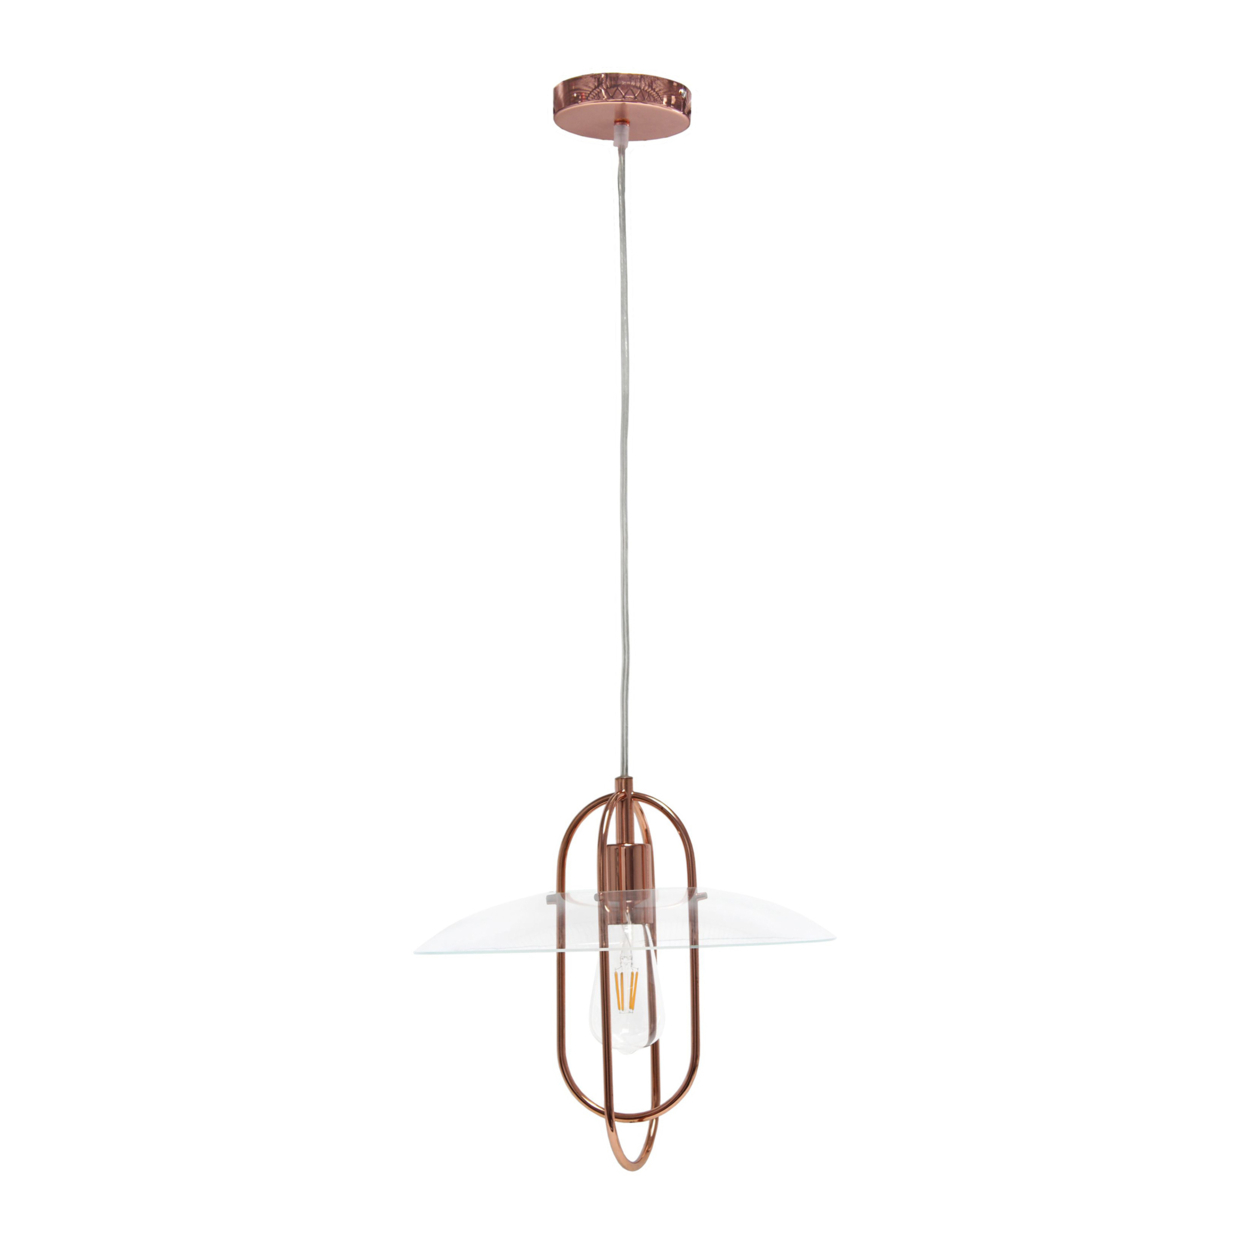 Simple Designs 1 Light Modern Metal Pendant Light with Clear Glass Shade - Rose Gold - image 1 of 8